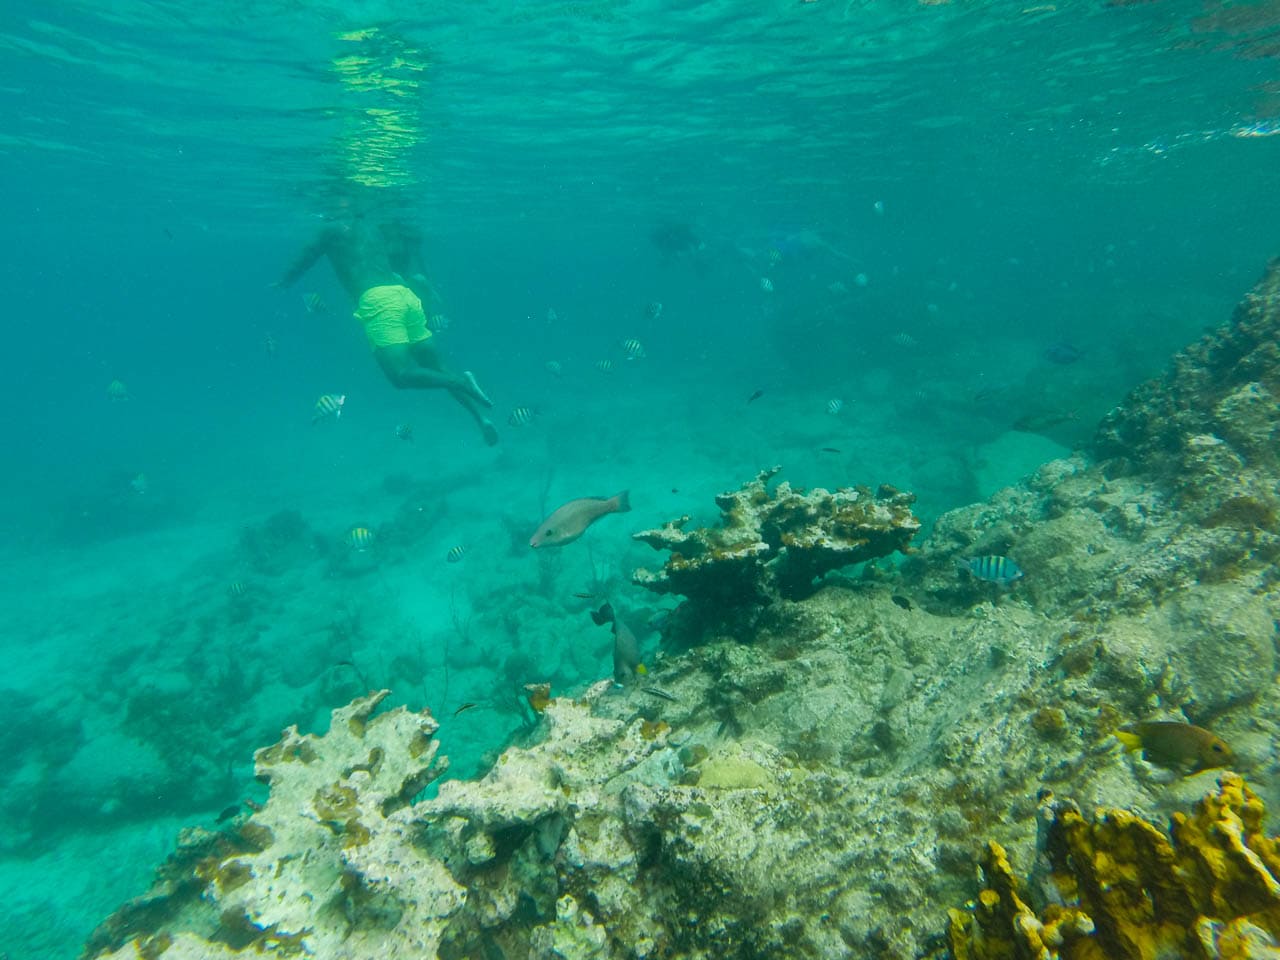 Snorkelers on the Underwater Snorkeling Trail at Trunk Bay in Virgin Islands National Park